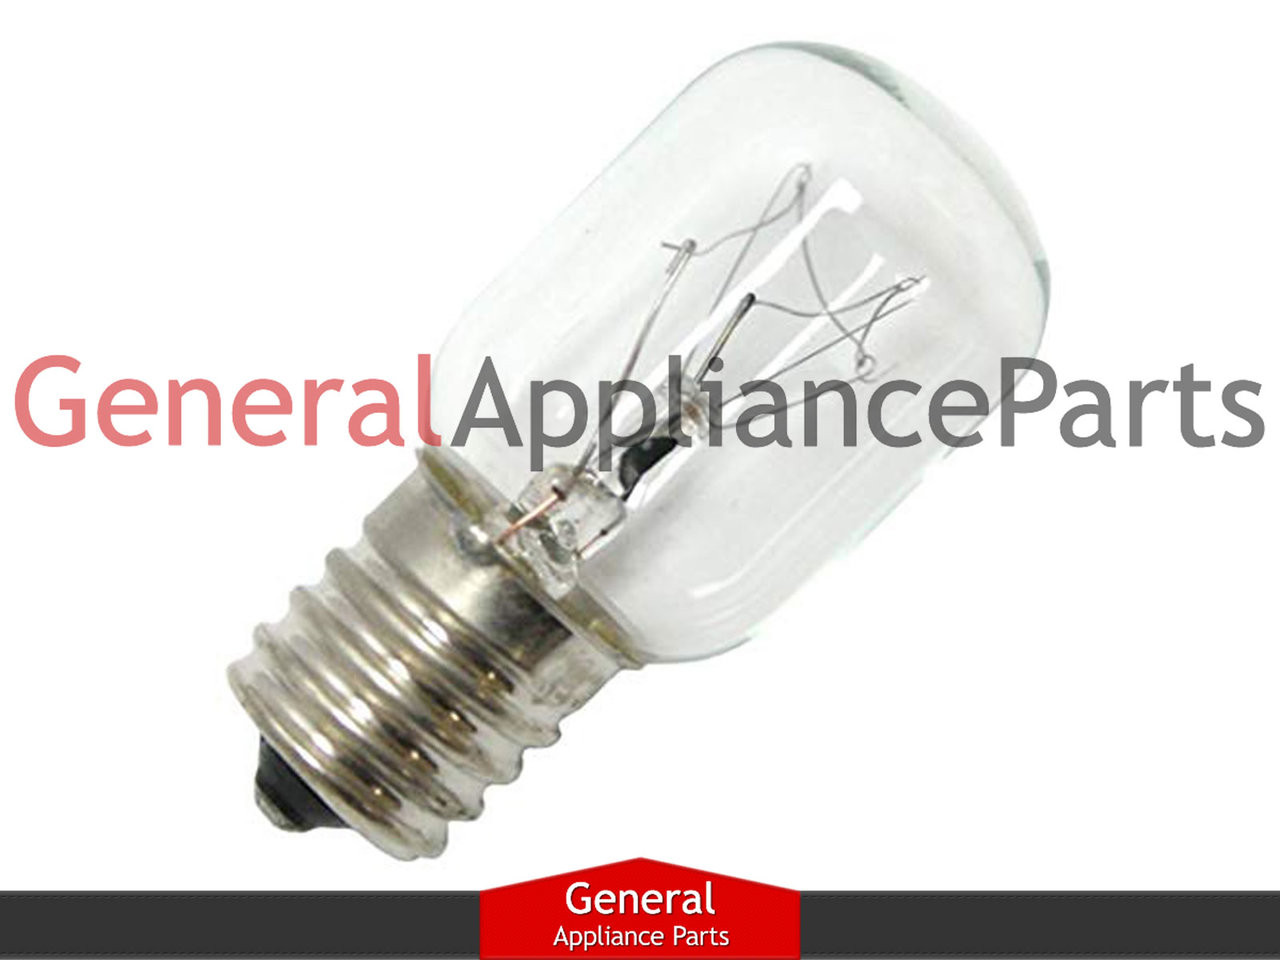 OEM Microwave Light Bulb Replaces Whirlpool Maytag Estate # 1890433 8206232  - General Appliance Parts